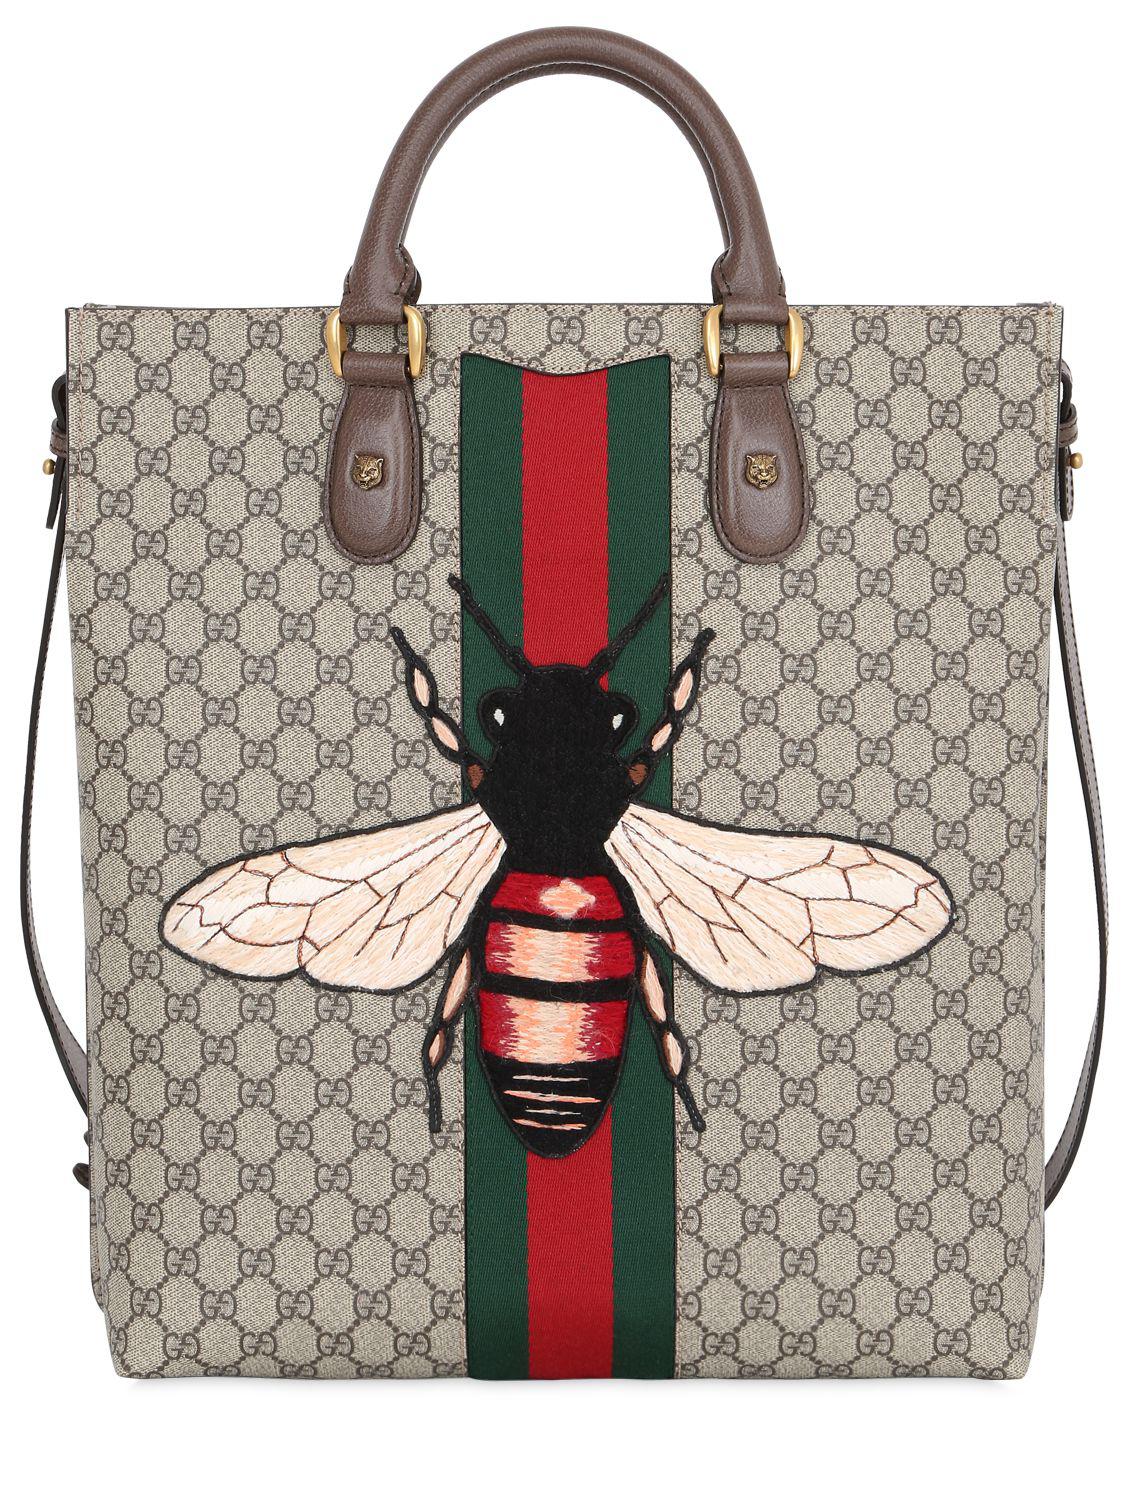 Gucci Bee Patch Gg Supreme Tote Bag in Natural